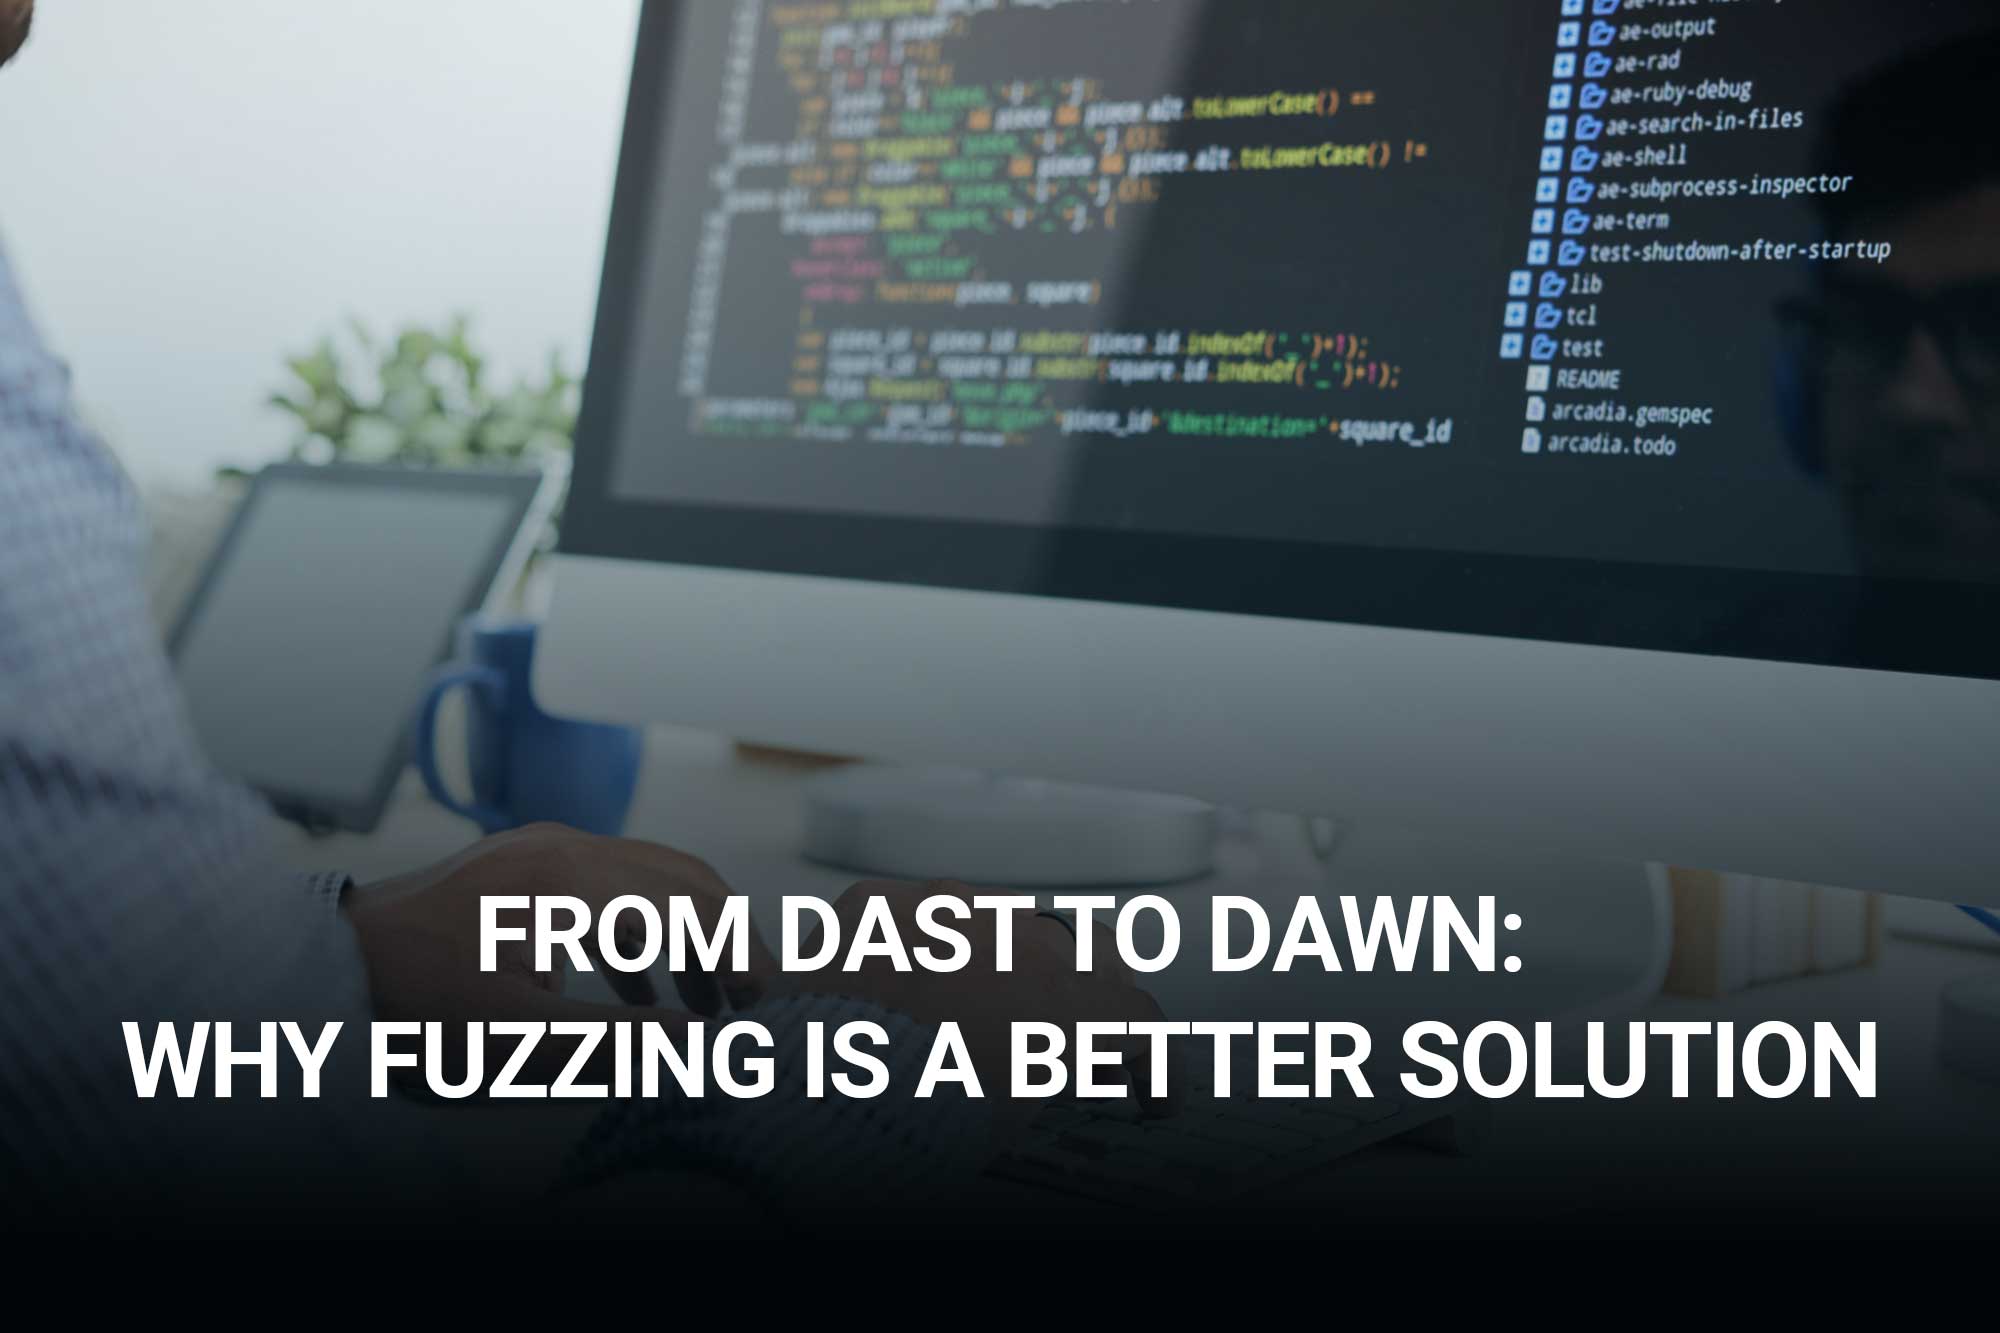 From DAST to dawn: why fuzzing is better solution | Code Intelligence